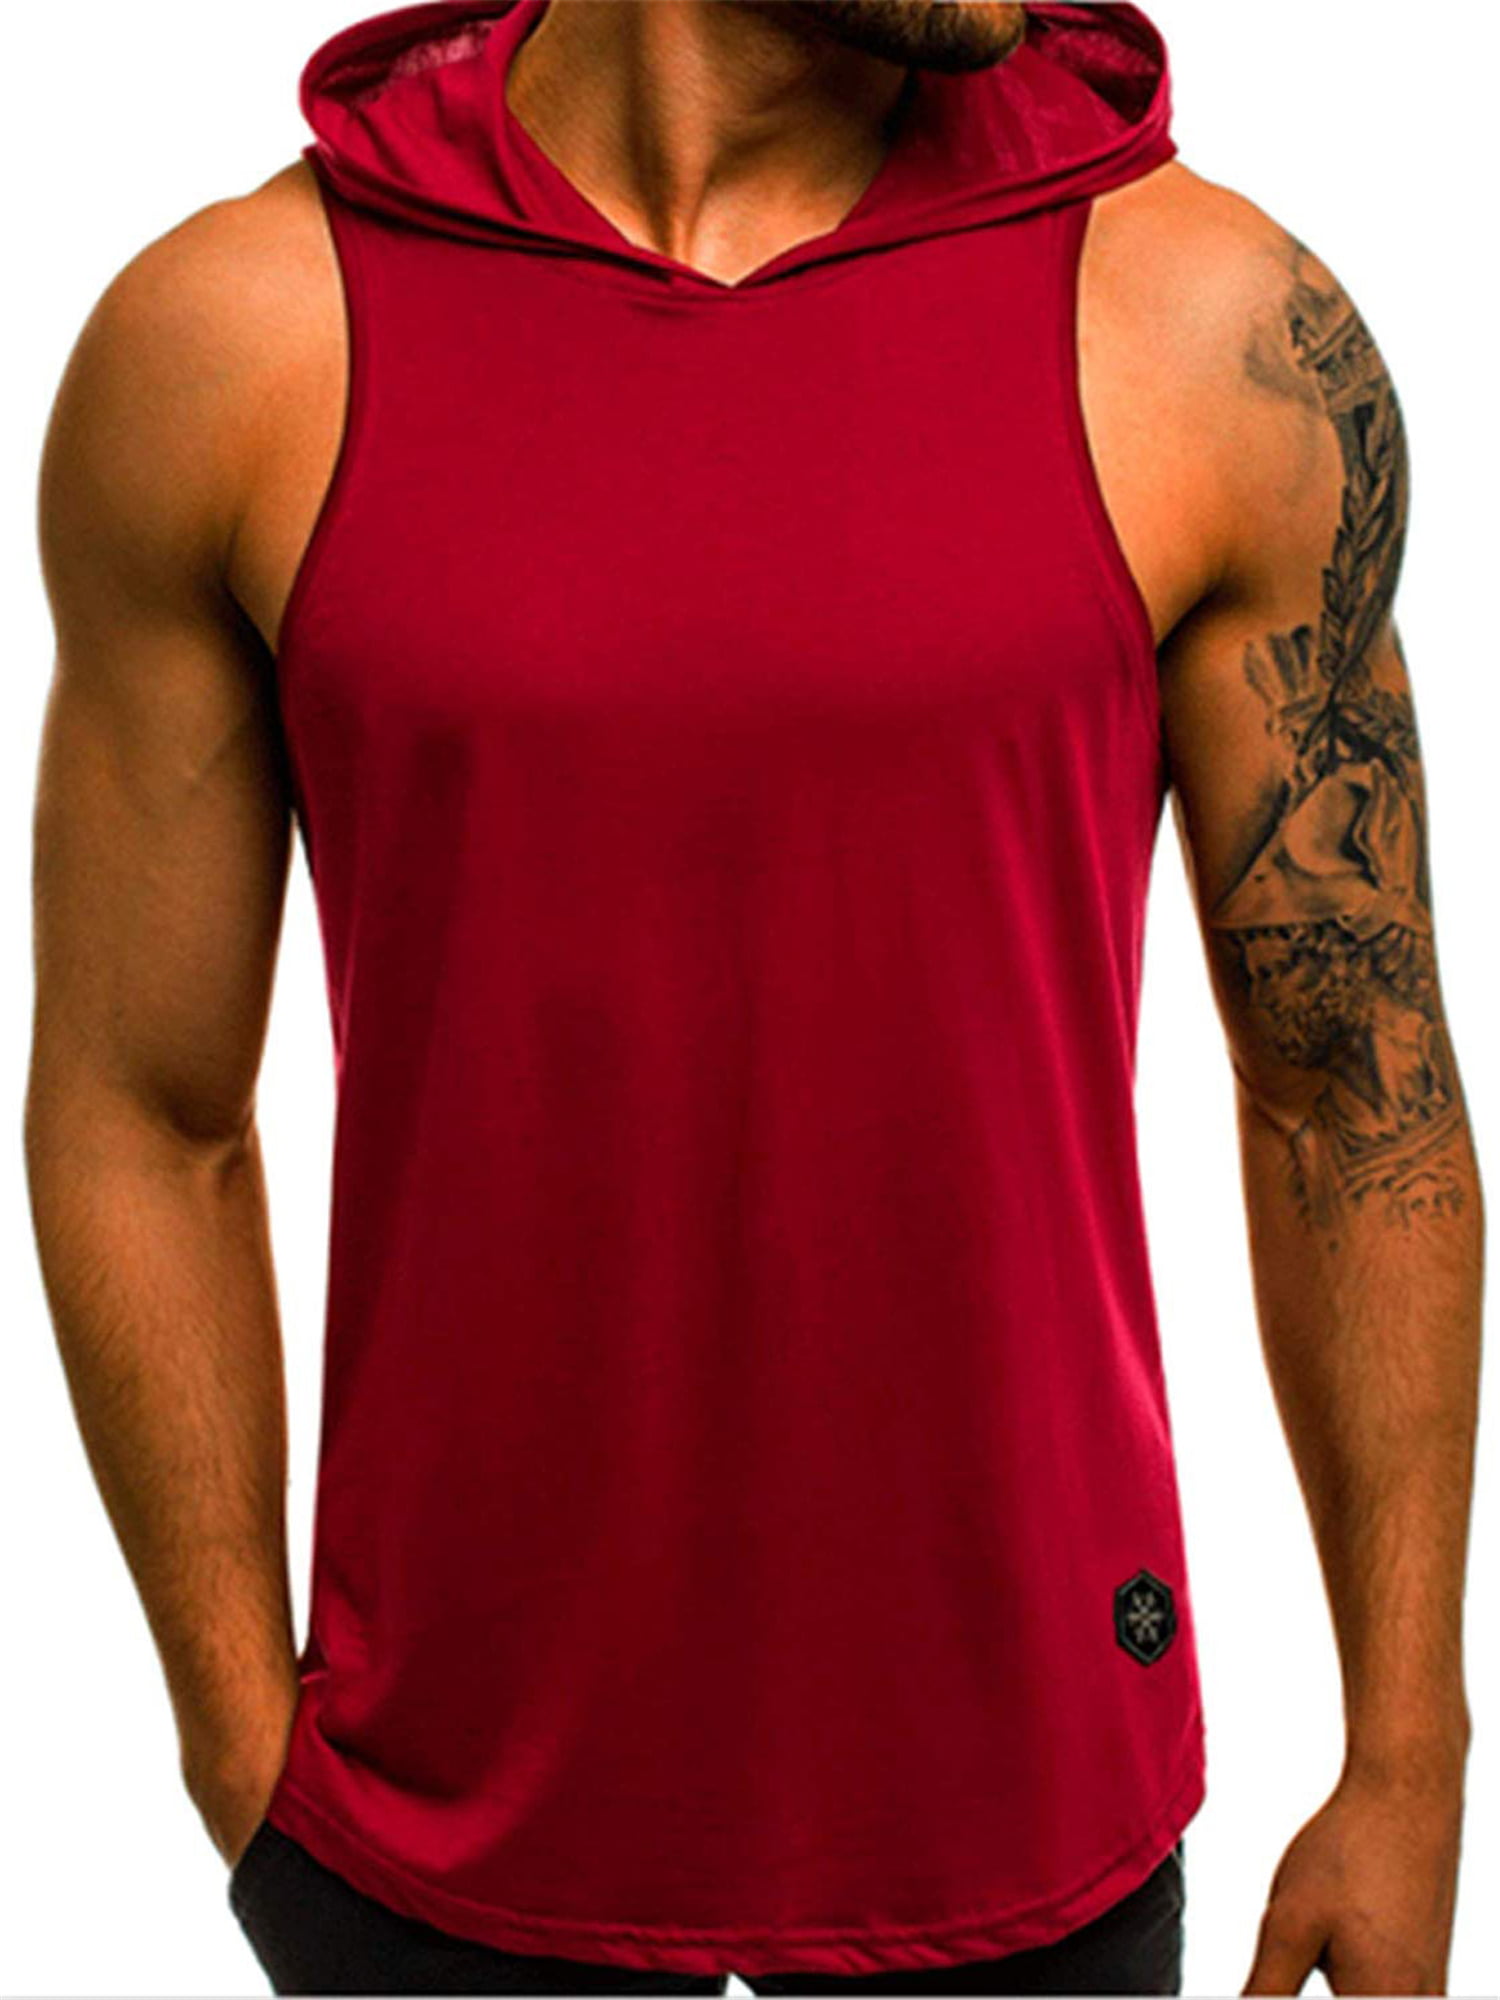 Magift Mens Cut Hoodies Bodybuilding Cool Muscle Workout Hooded Tank Tops Sleeveless Gym Shirt